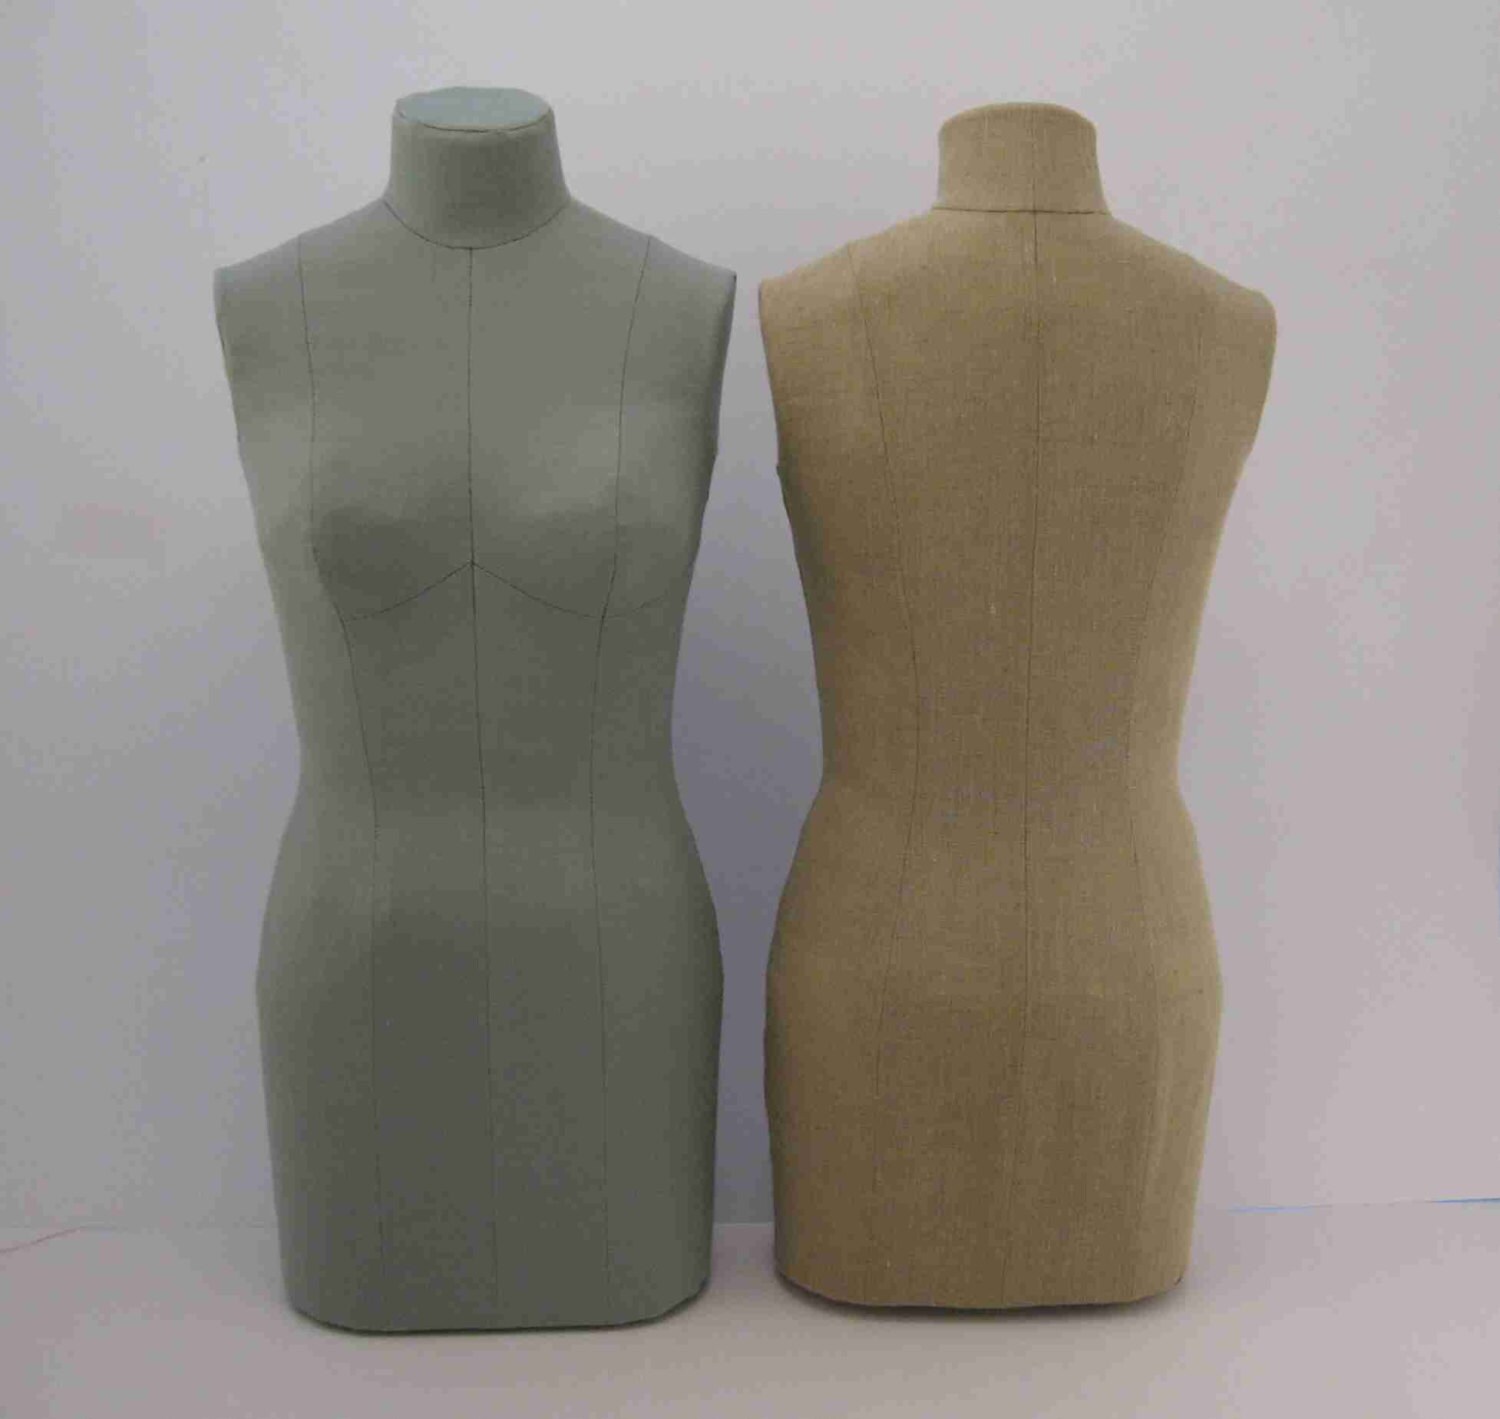 Female Dress Form Padding System for Professional Dress Forms (12